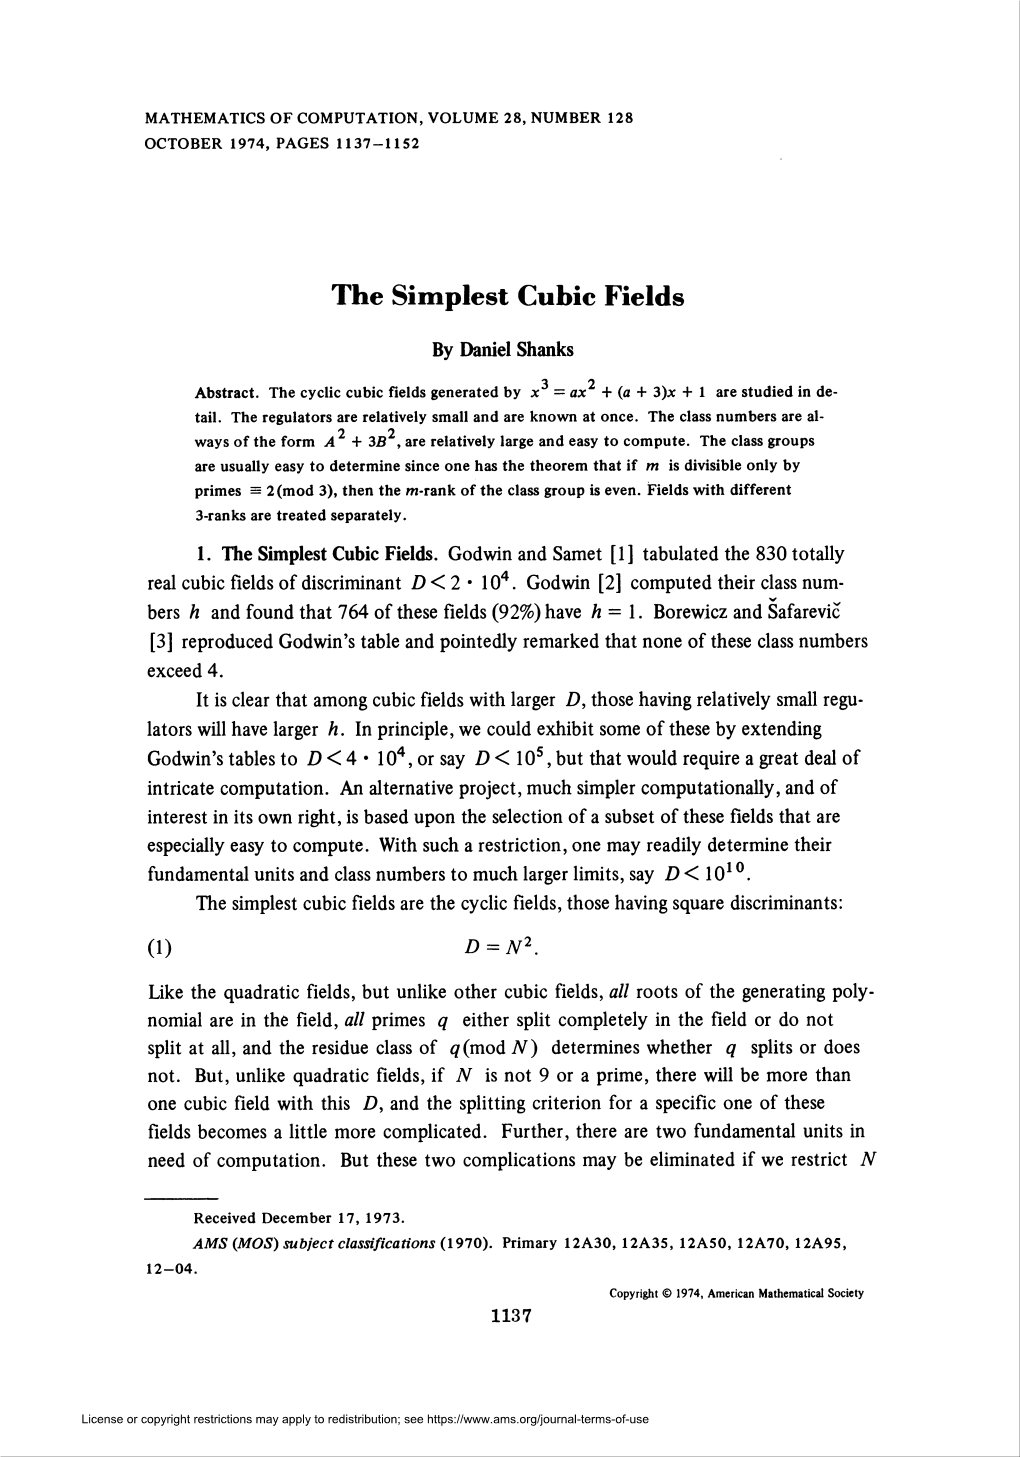 The Simplest Cubic Fields